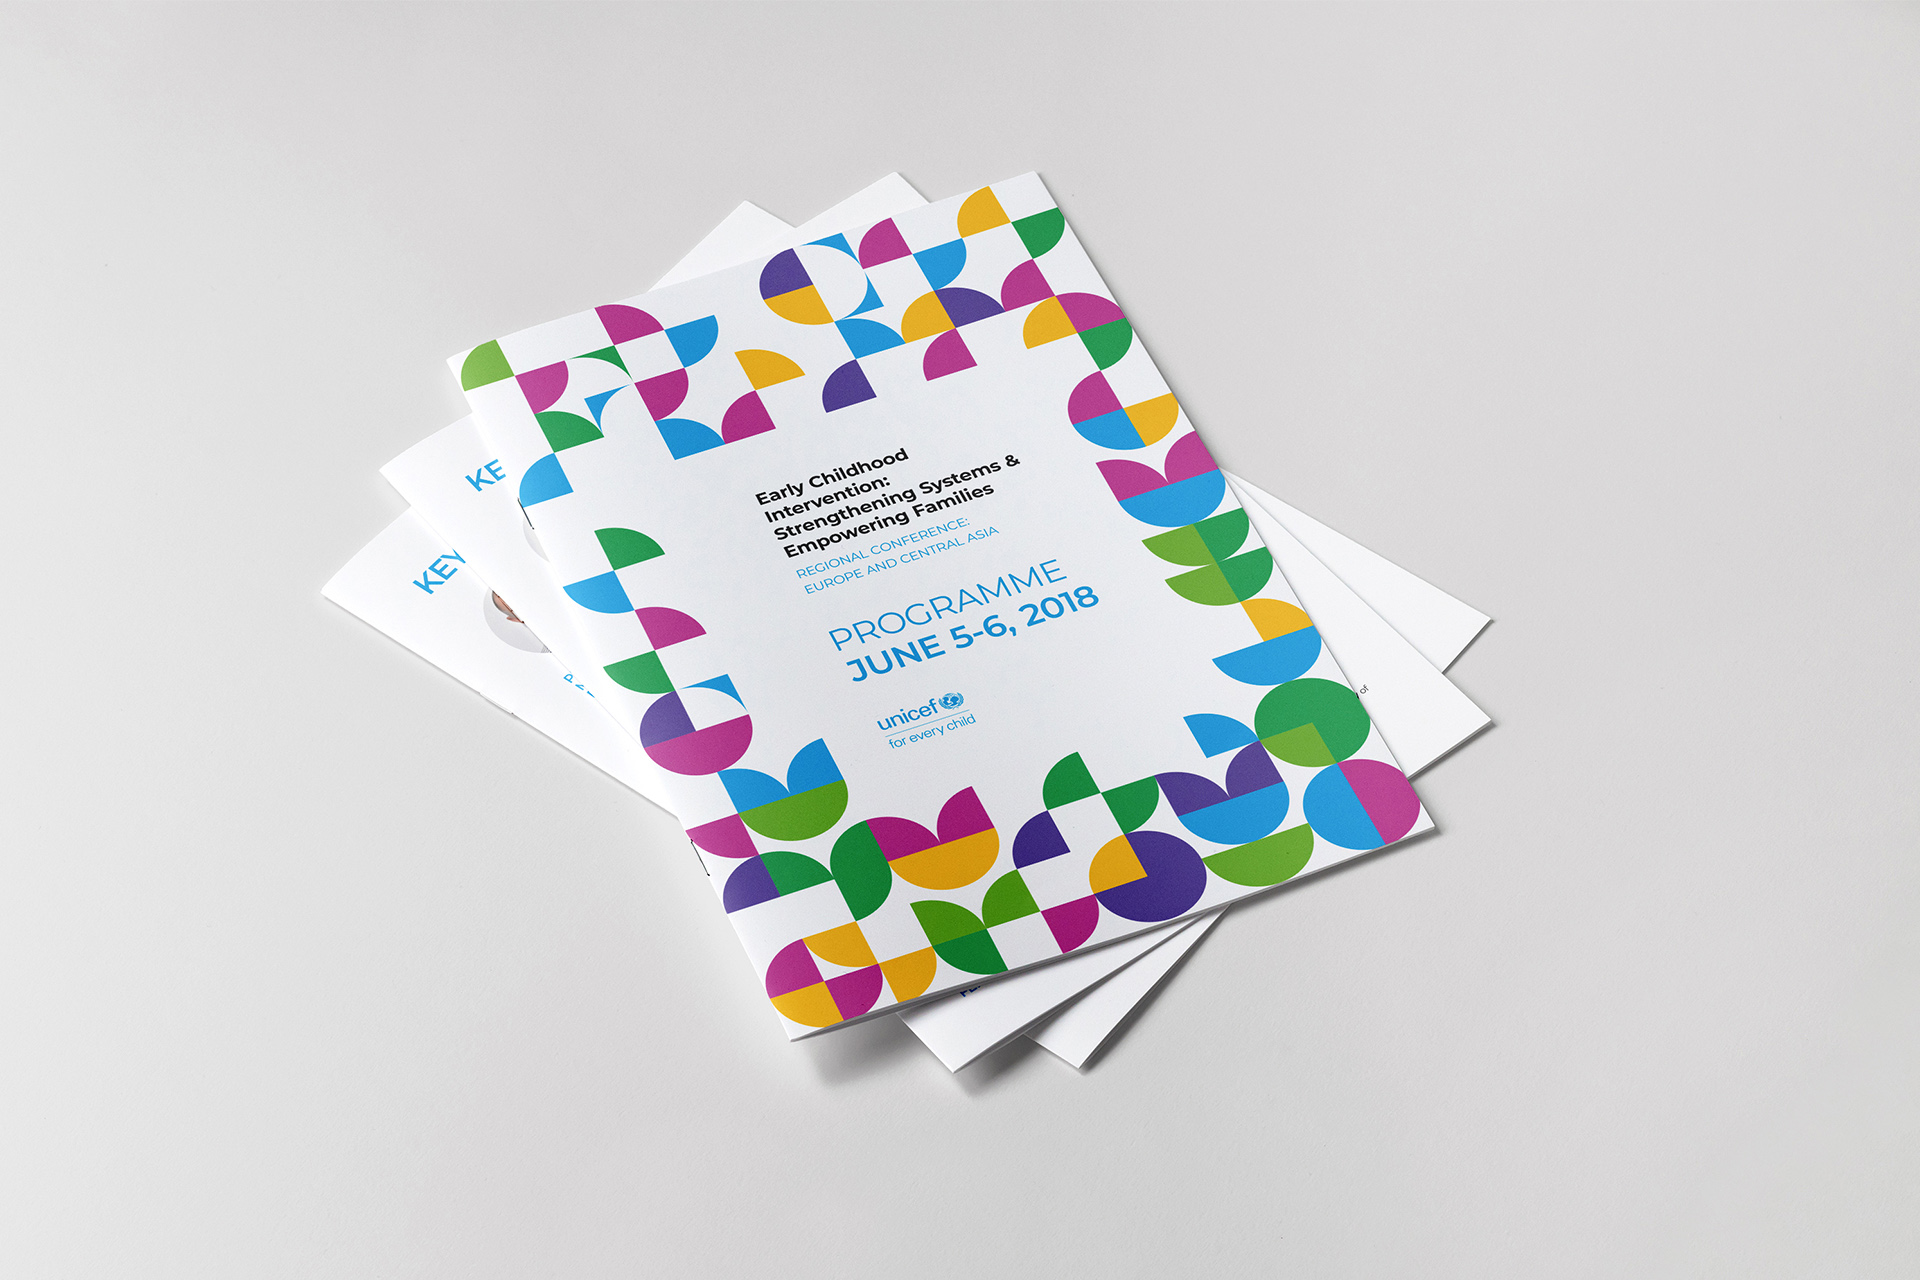 Design of the brochure with the conference program